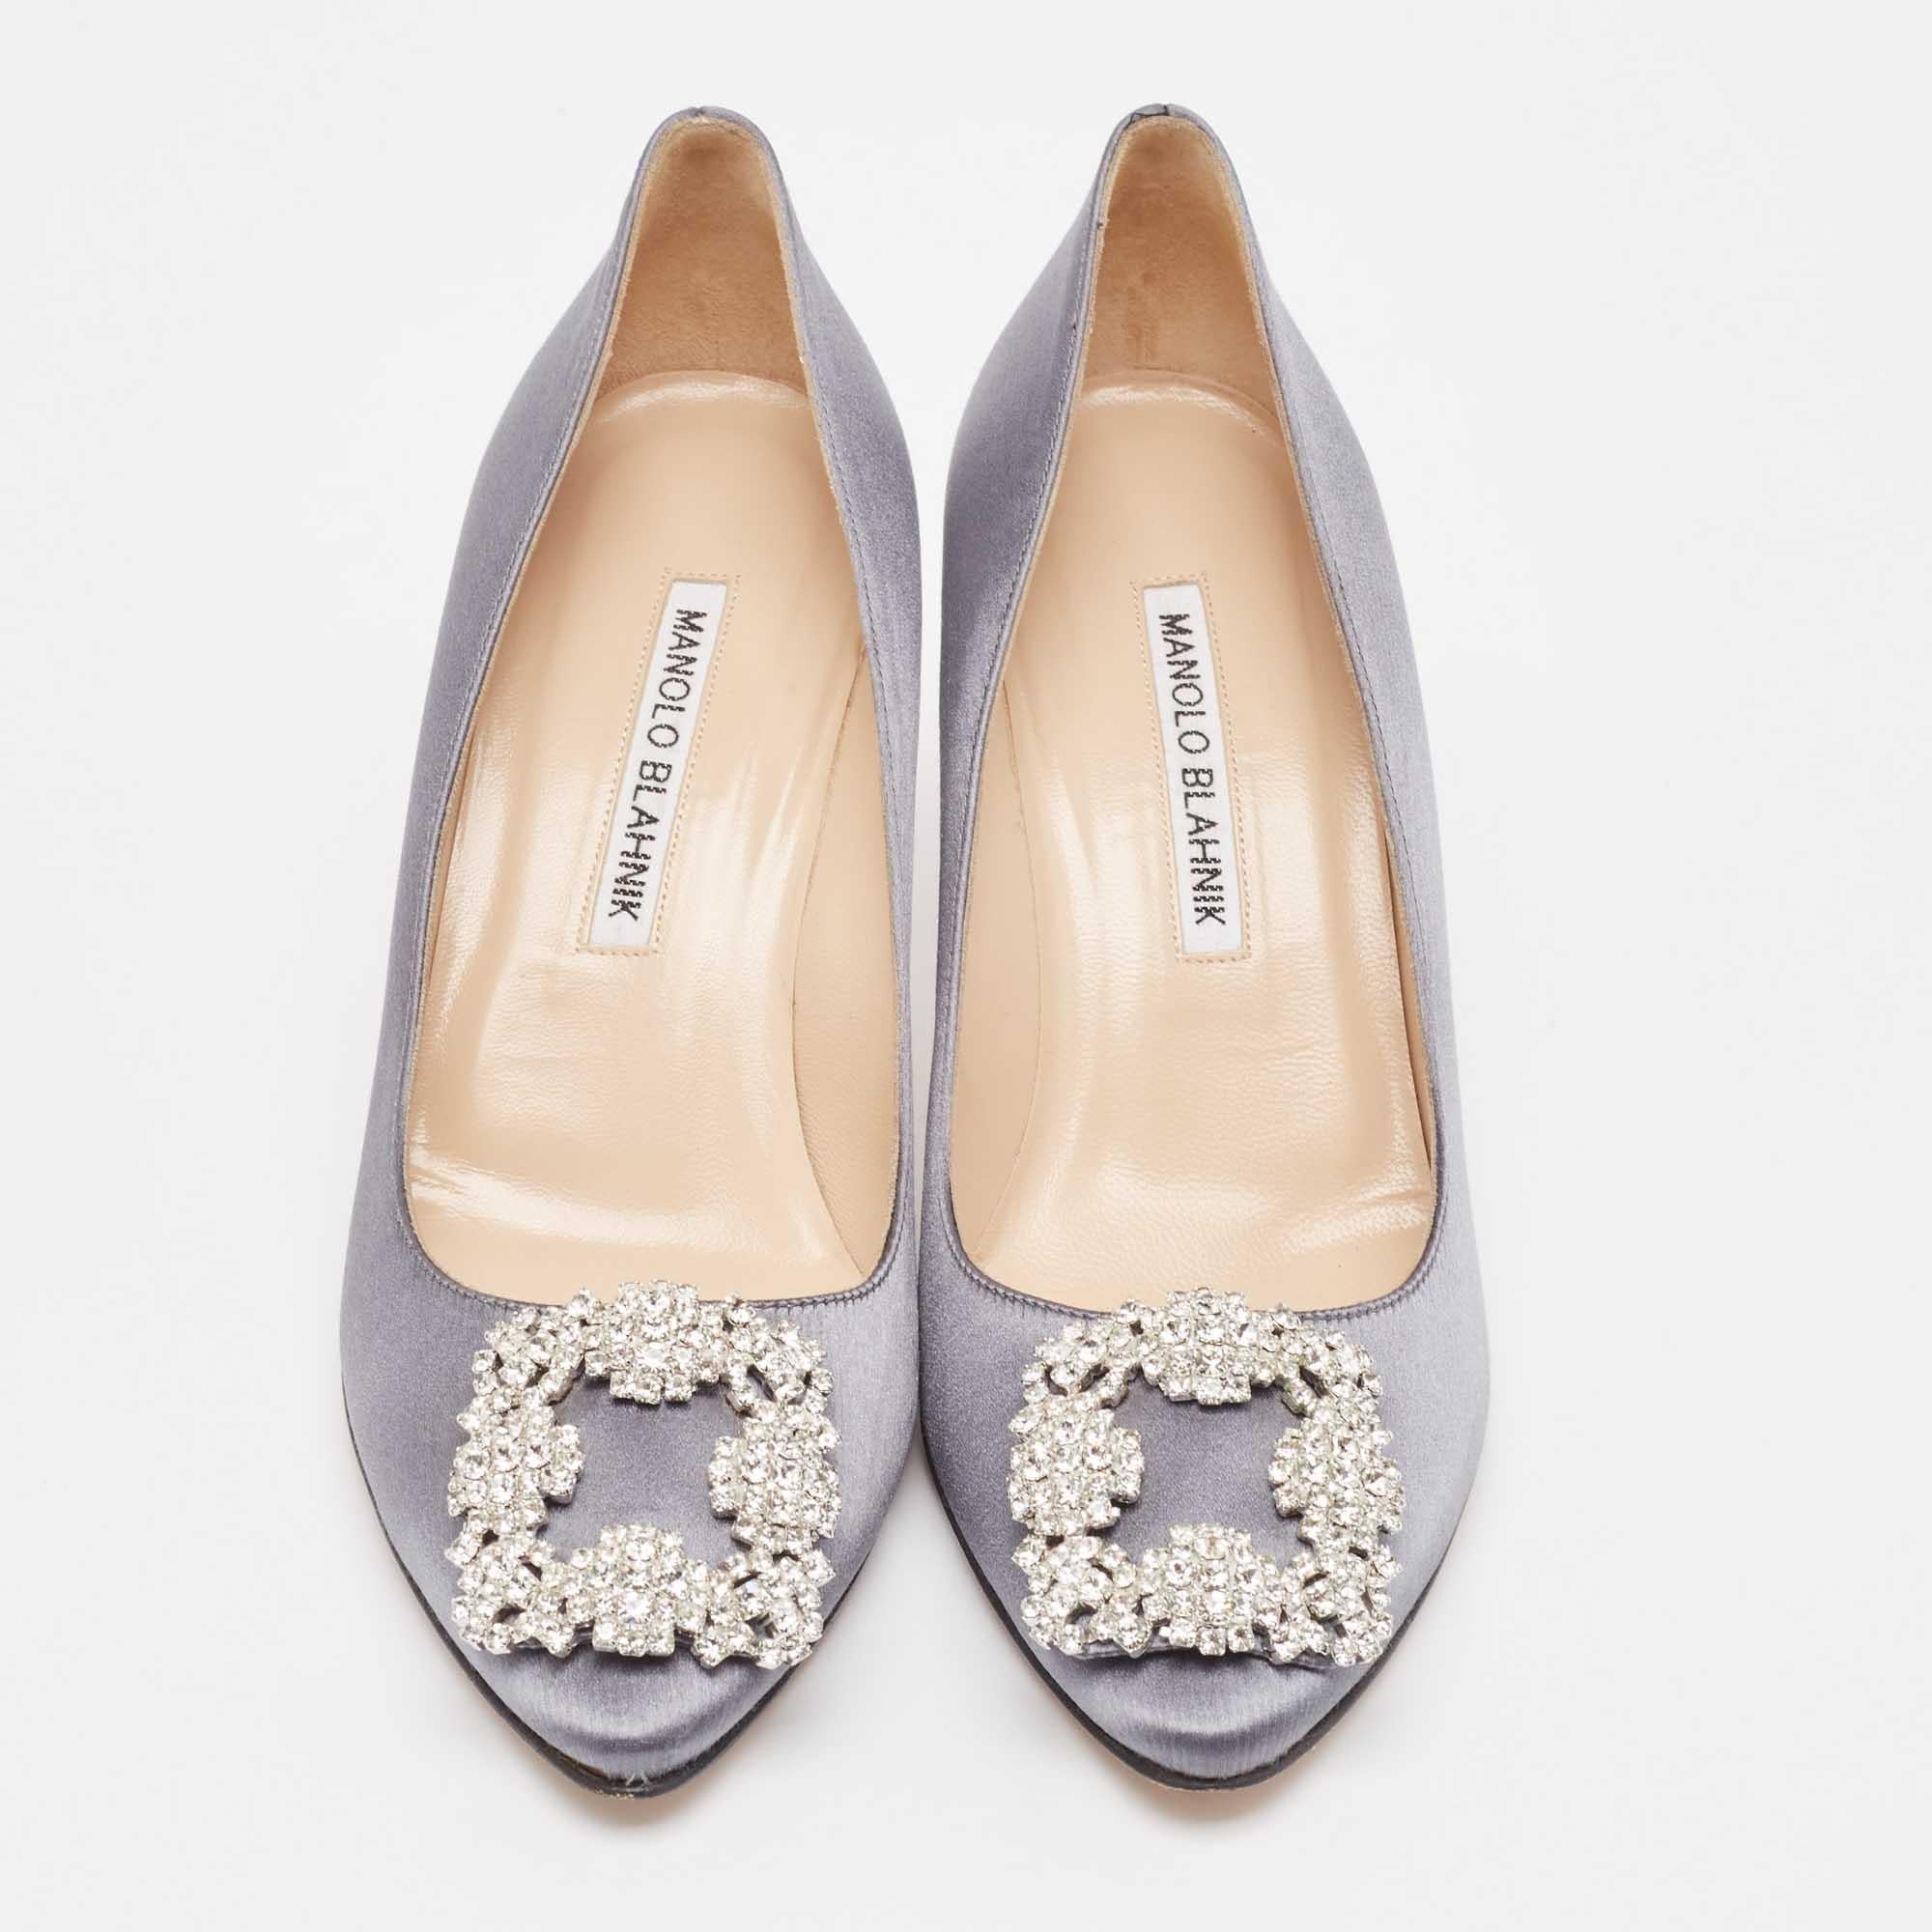 Complement your well-put-together outfit with these authentic Manolo Blahnik grey shoes. Timeless and classy, they have an amazing construction for enduring quality and comfortable fit.

Includes: Original Dustbag

